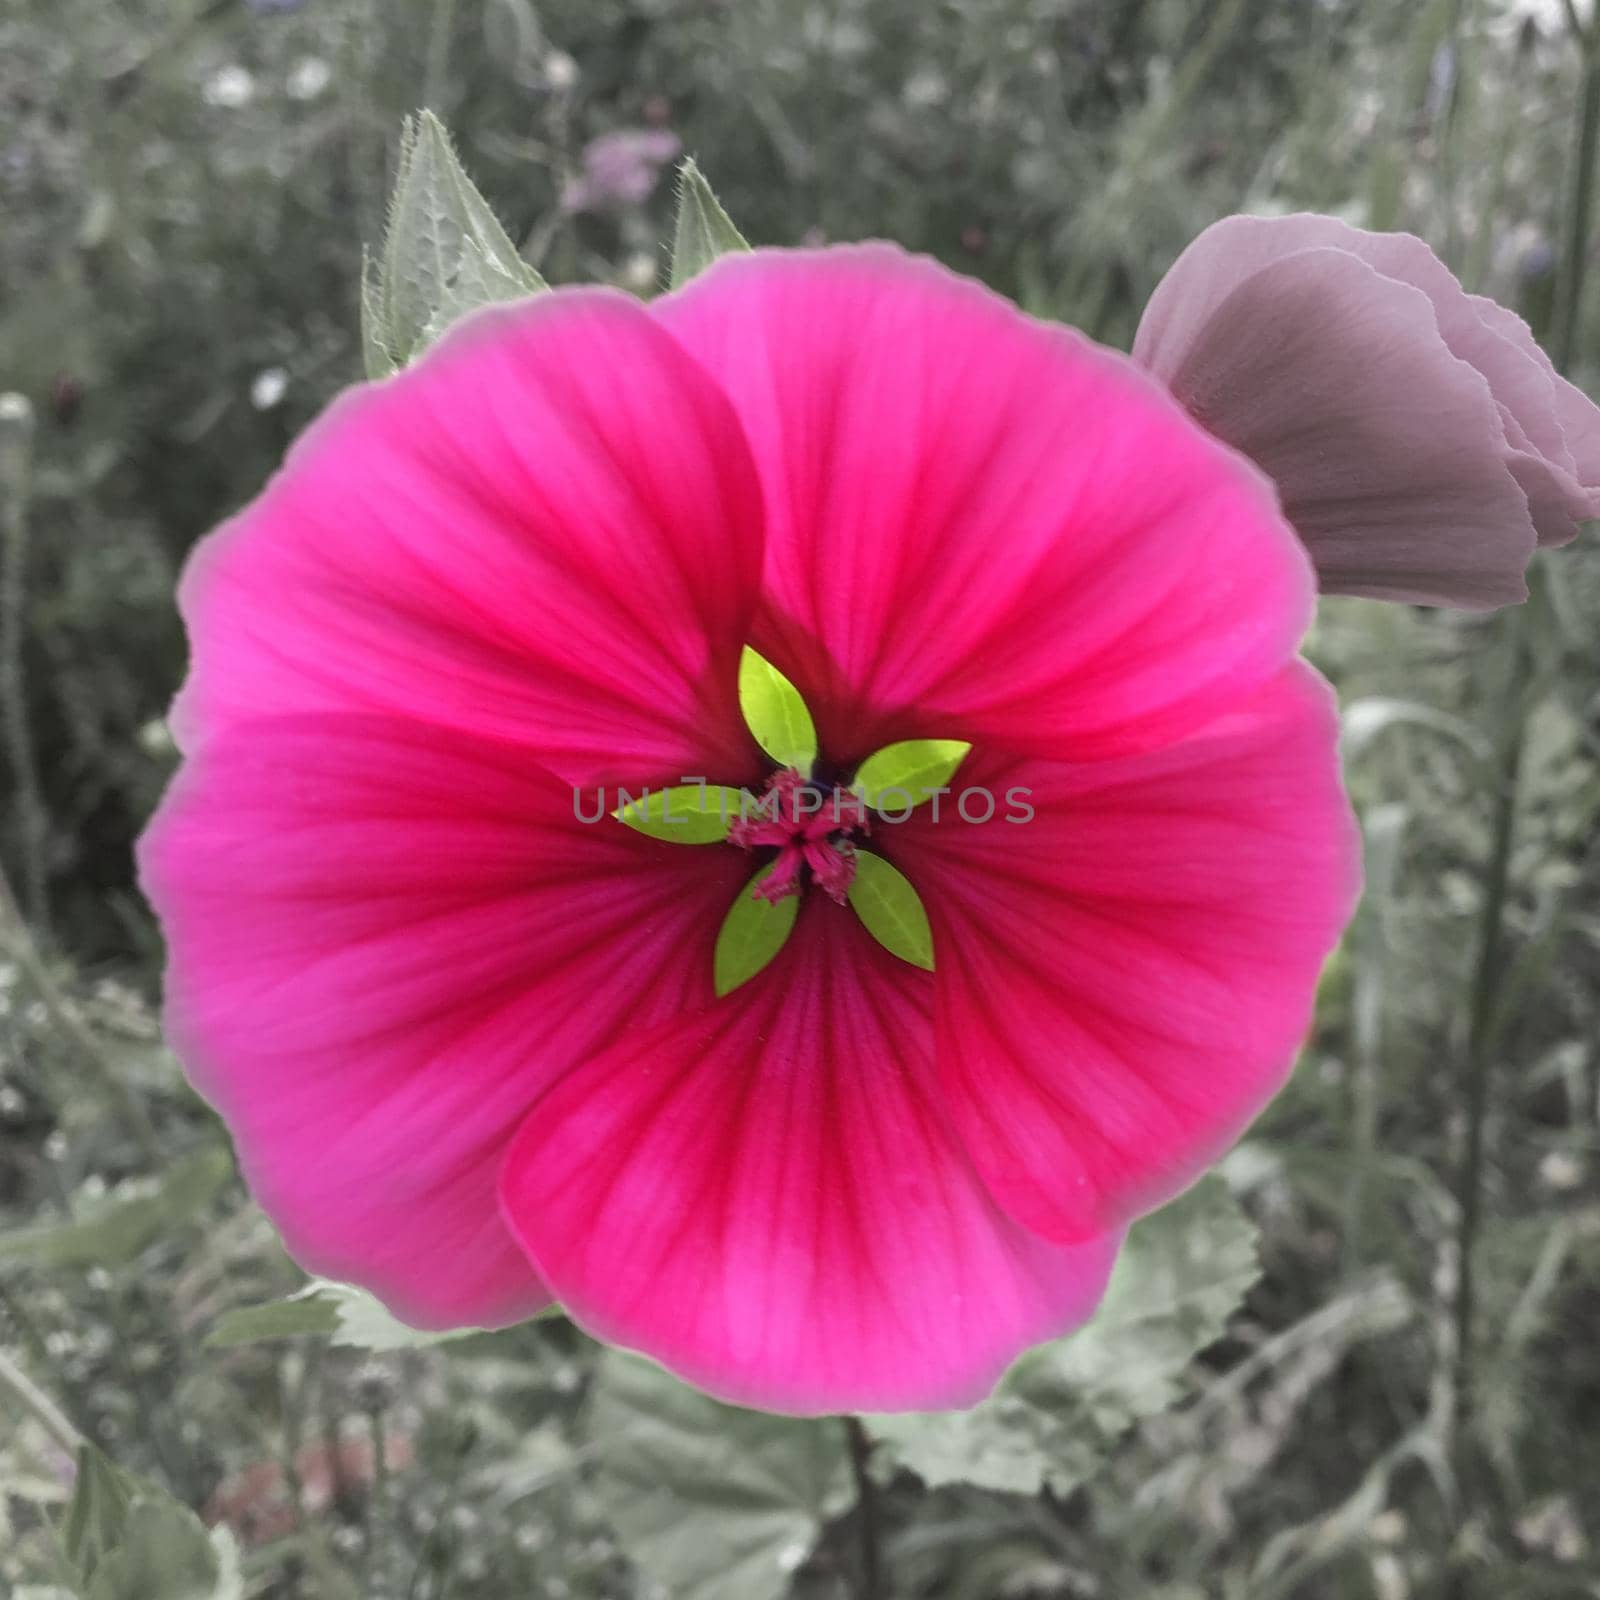 A round pink flower by Bwise